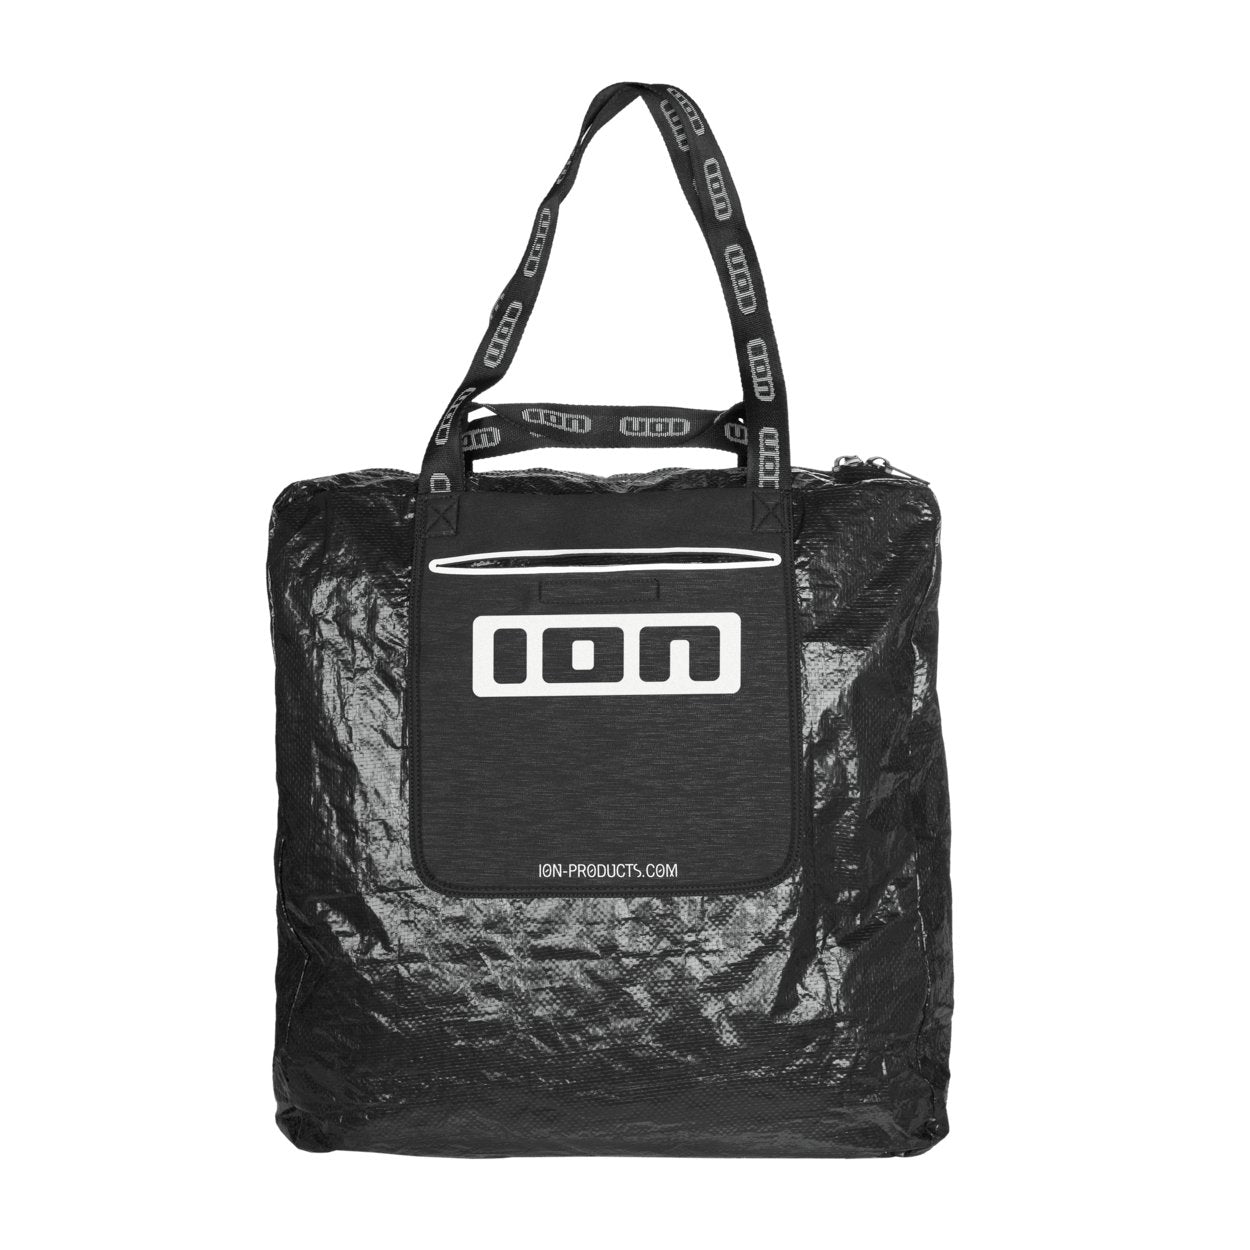 ION MTB Utility Bag 2023 - Worthing Watersports - 9008415599769 - Accessories - ION Bike